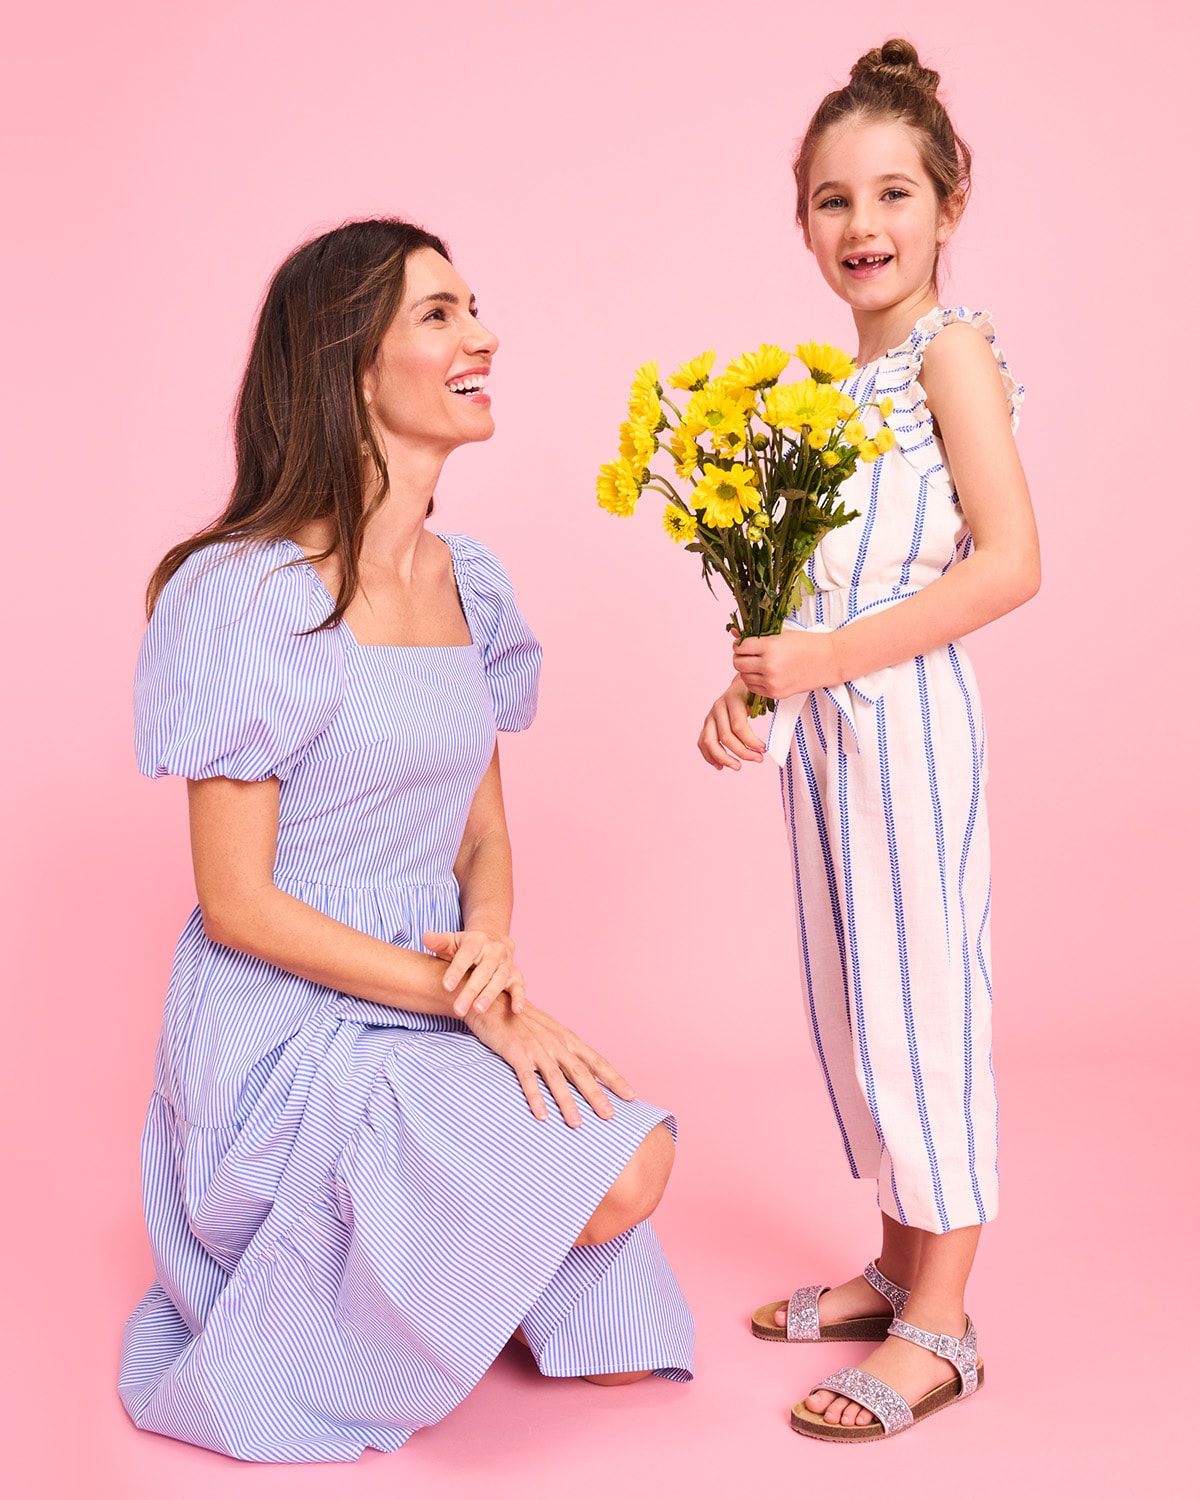 Dressed-up styles for Mother’s Day (and beyond!)